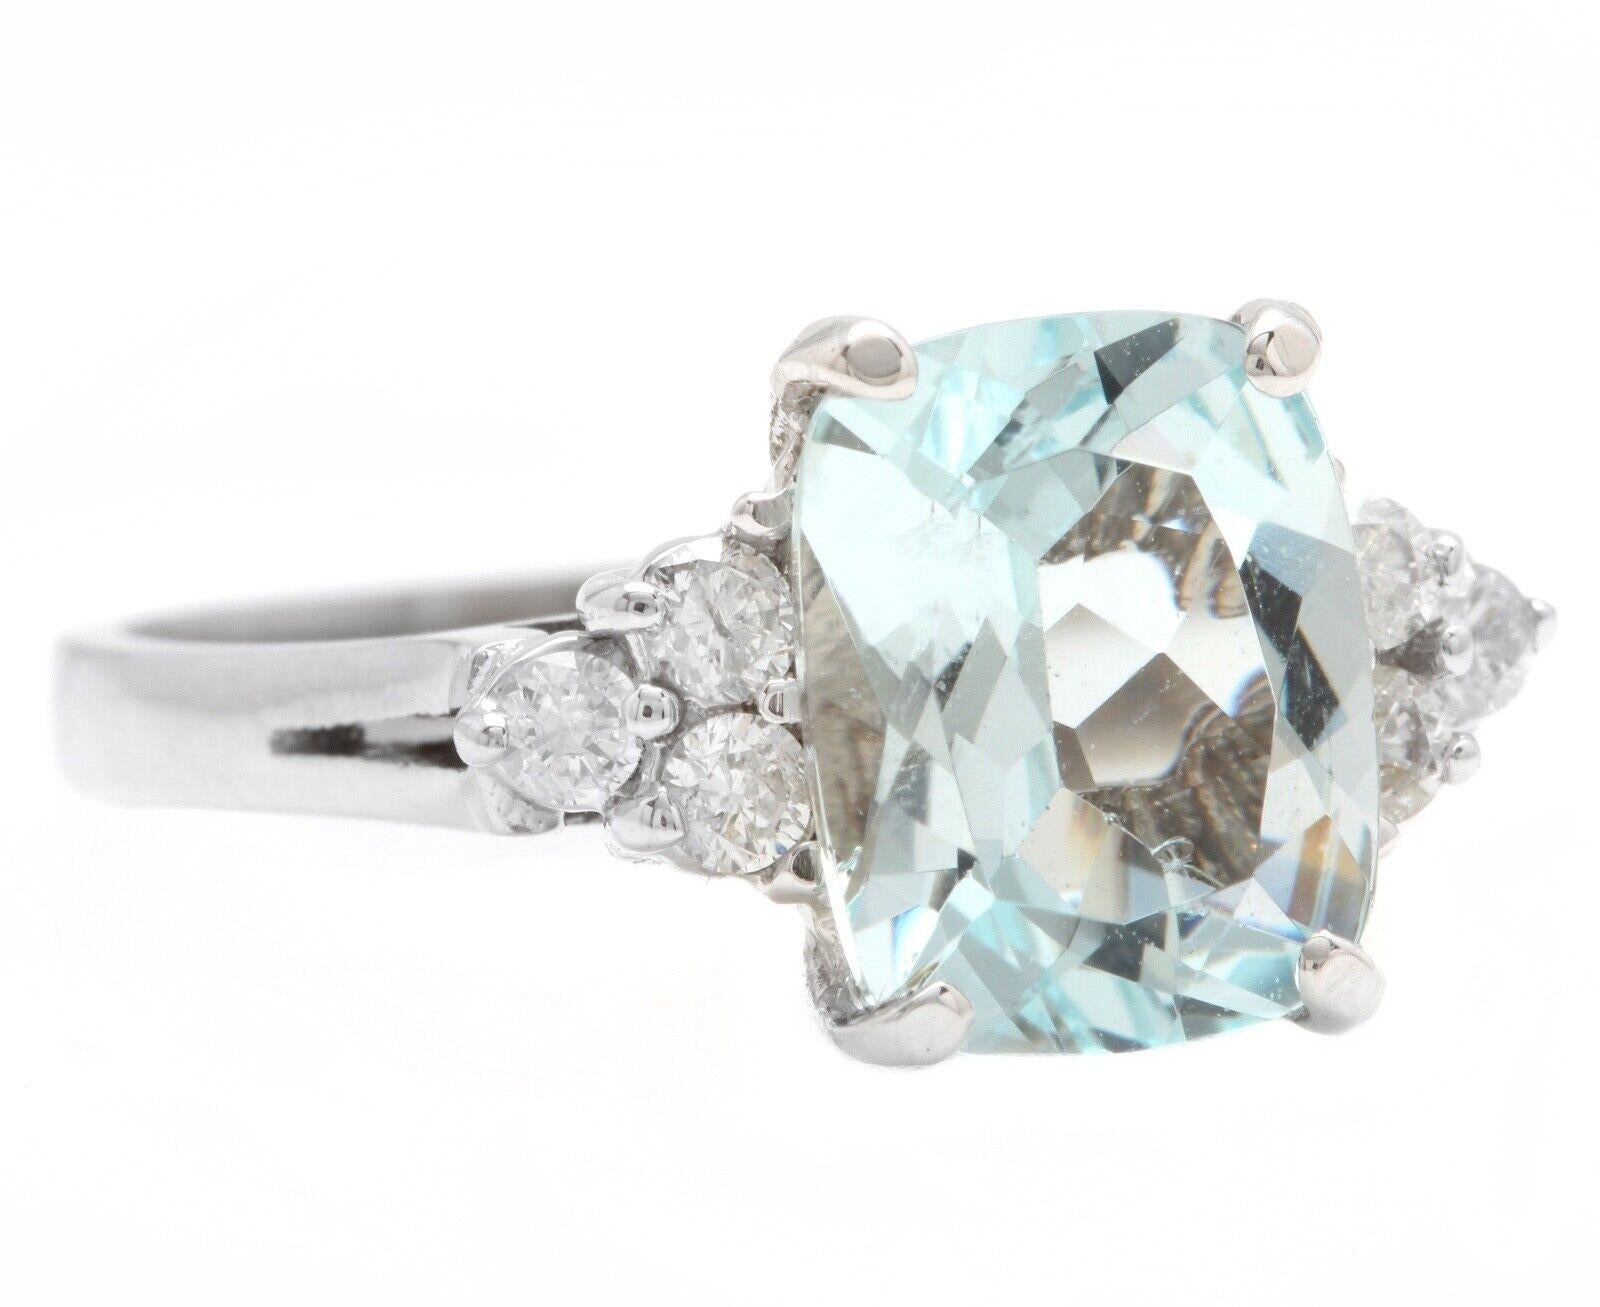 3.35 Carats Natural Aquamarine and Diamond 14K Solid White Gold Ring

Suggested Replacement Value: Approx. $4,000.00

Total Natural Cushion Aquamarine Weights: Approx. 3.00 Carats 

Aquamarine Measures: Approx. 10.00 x 8.00mm

Aquamarine Treatment: